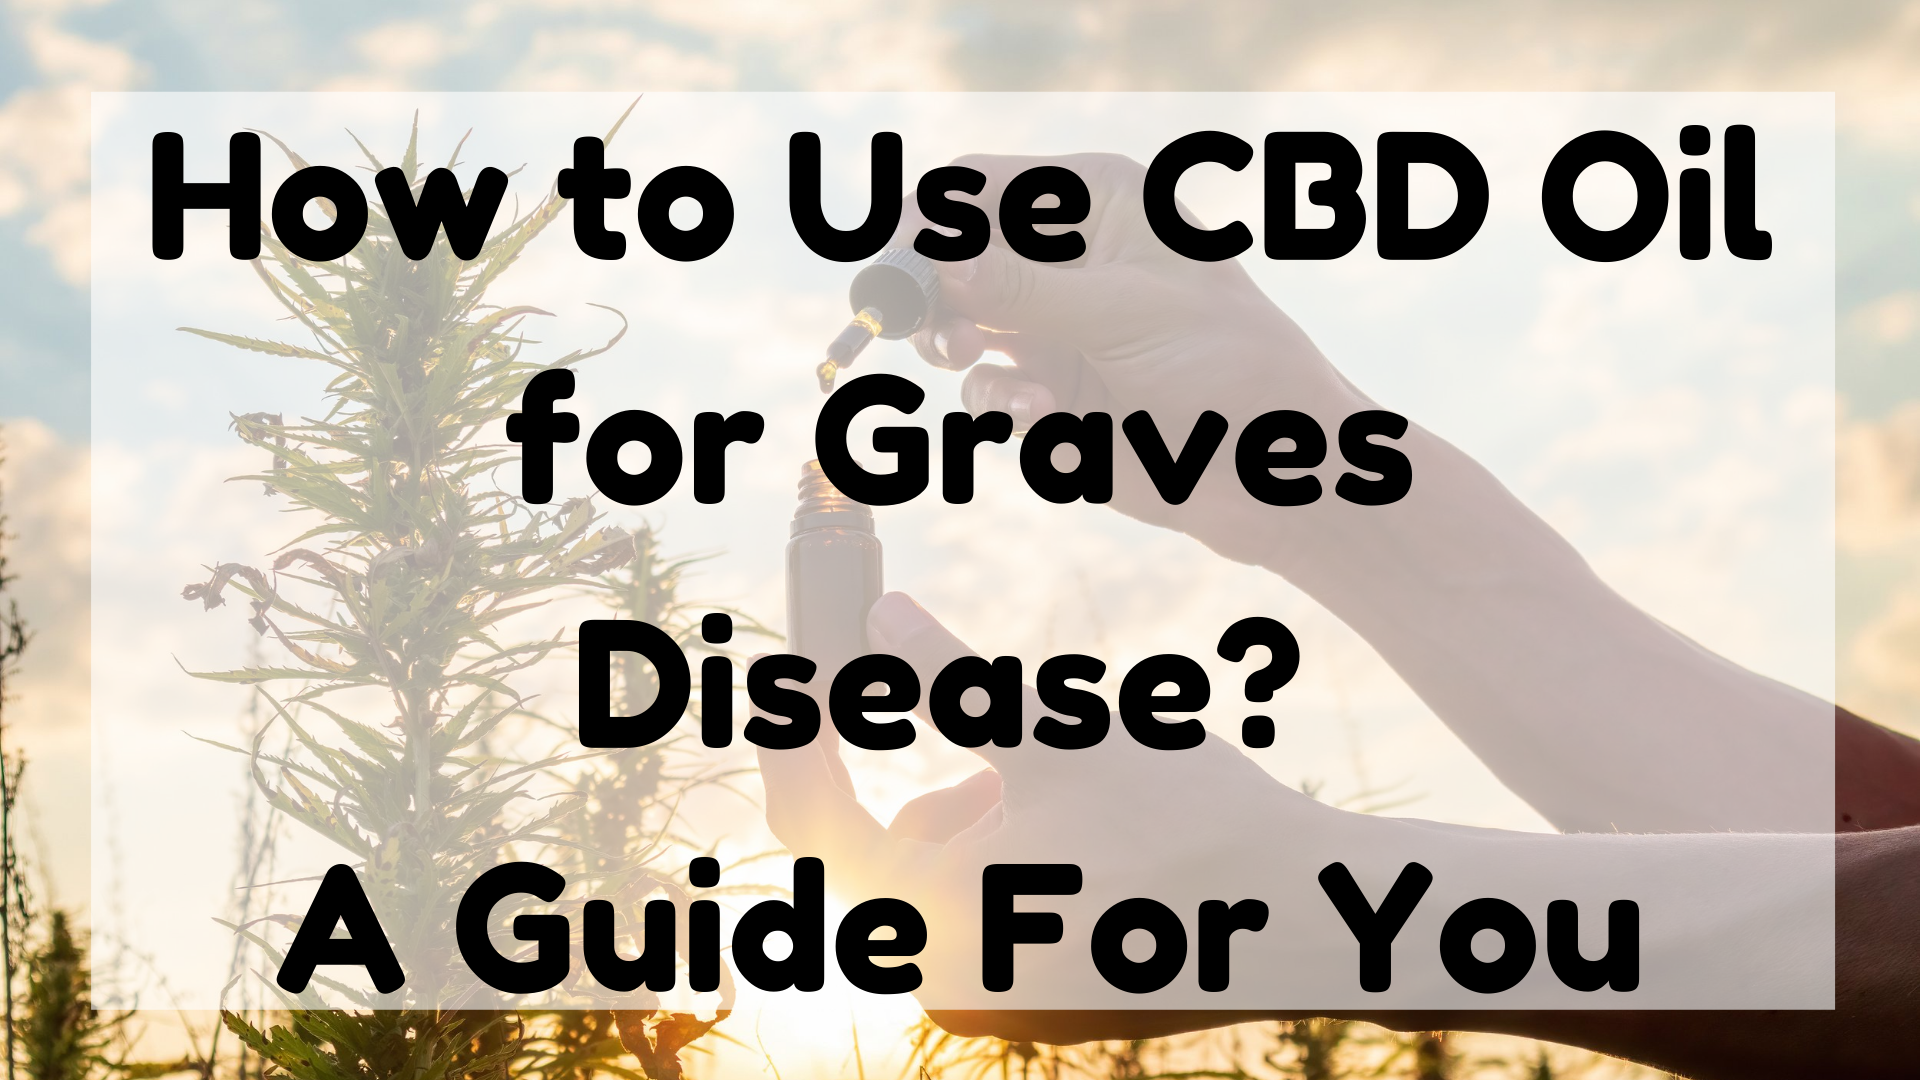 How to Use CBD Oil for Graves Disease?